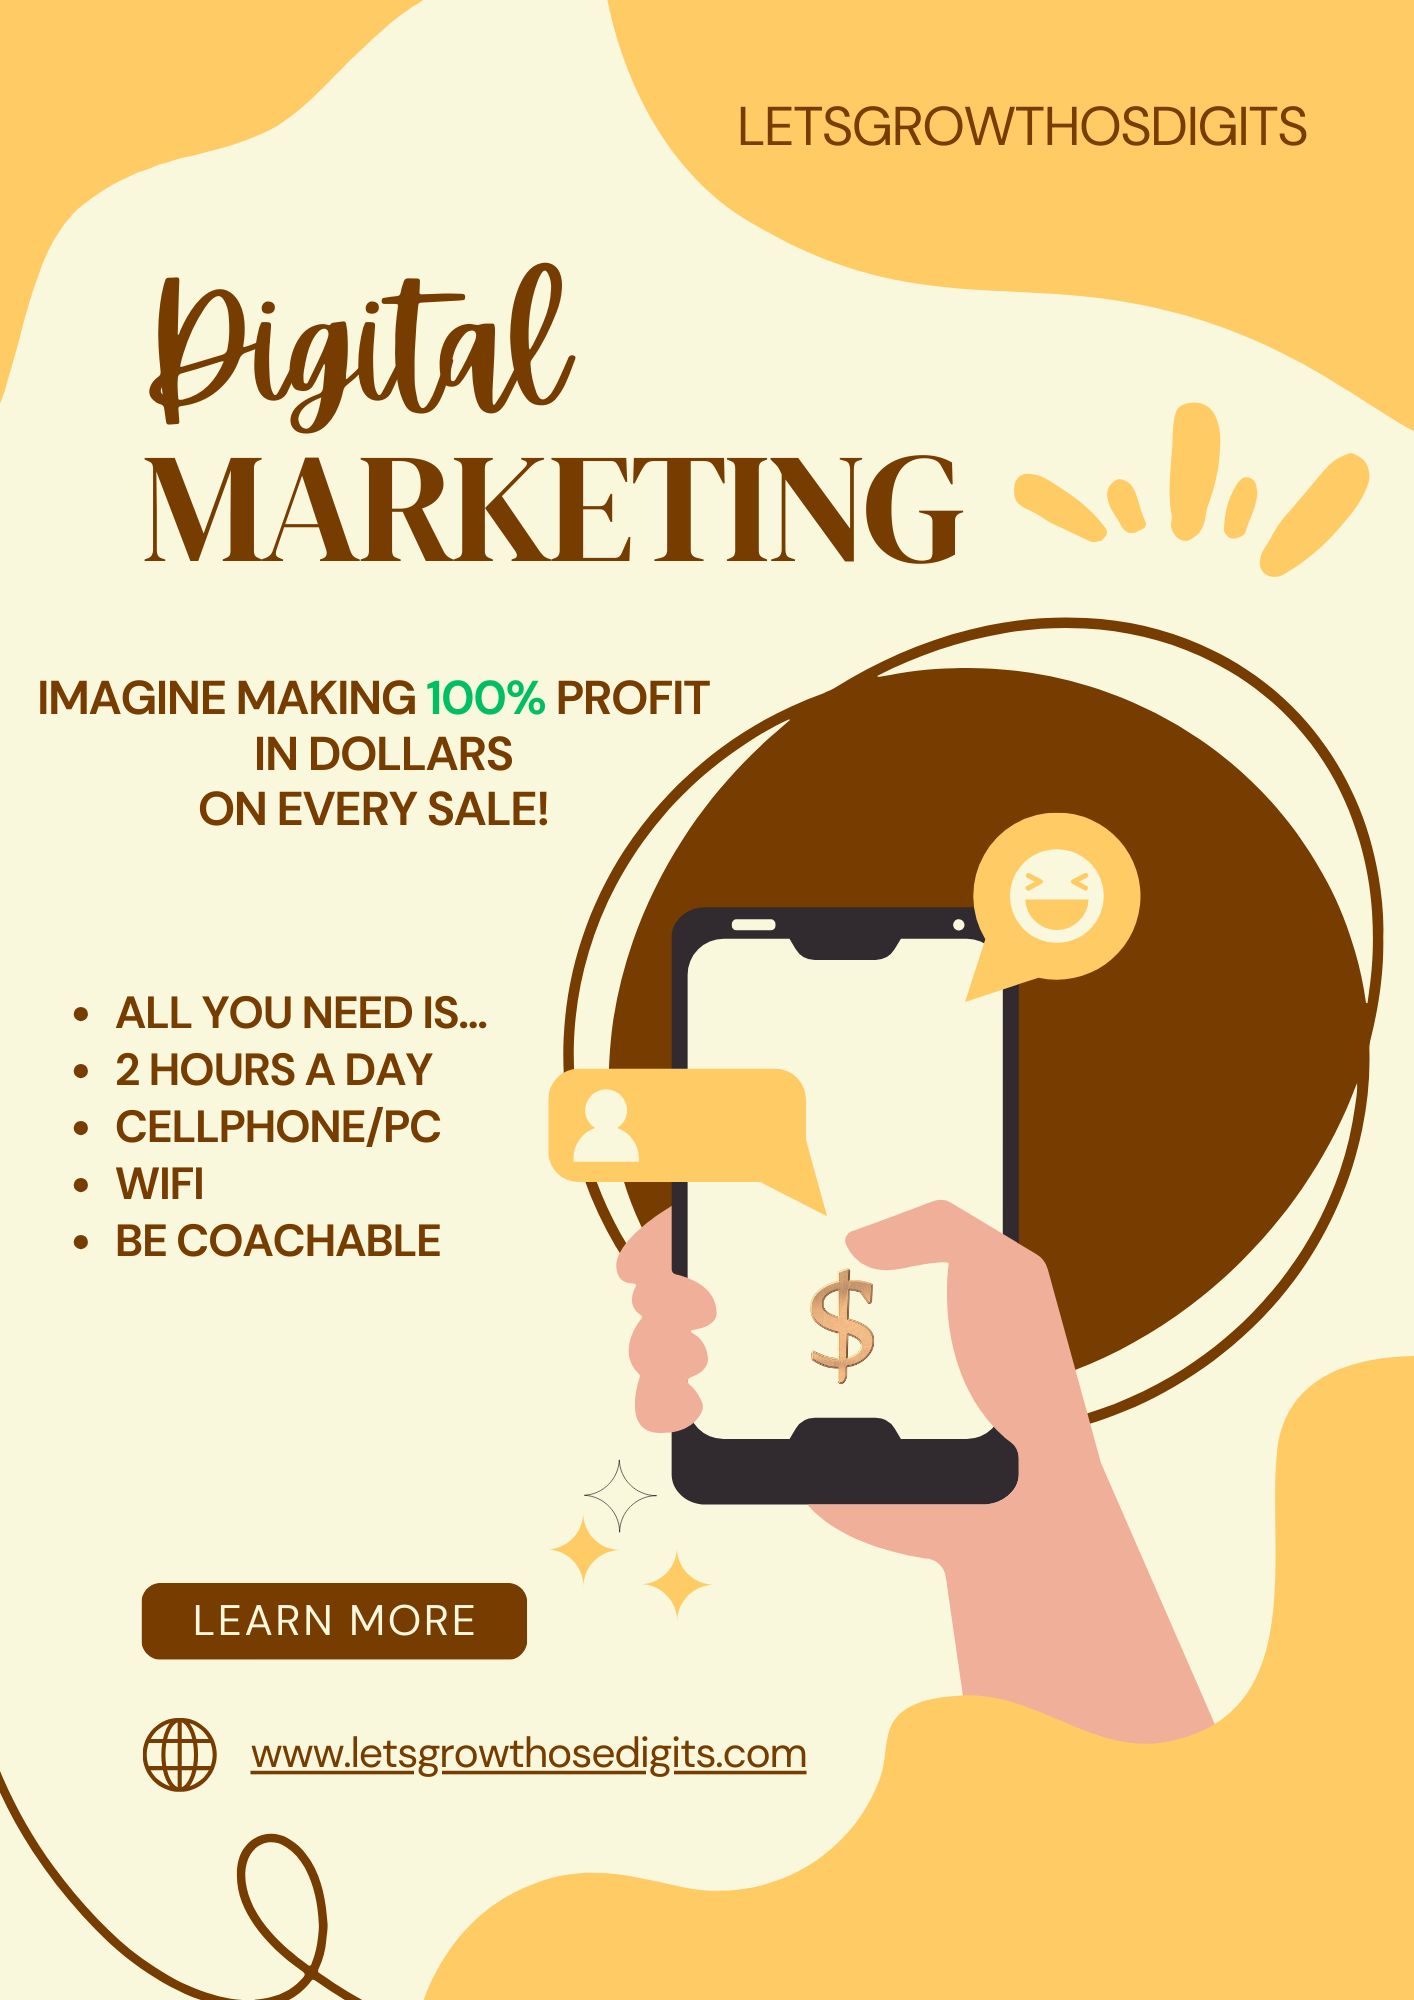 Earn Big, Work Little: $100 Daily in Just 2 Hours! - Richards Bay Sales, Marketing